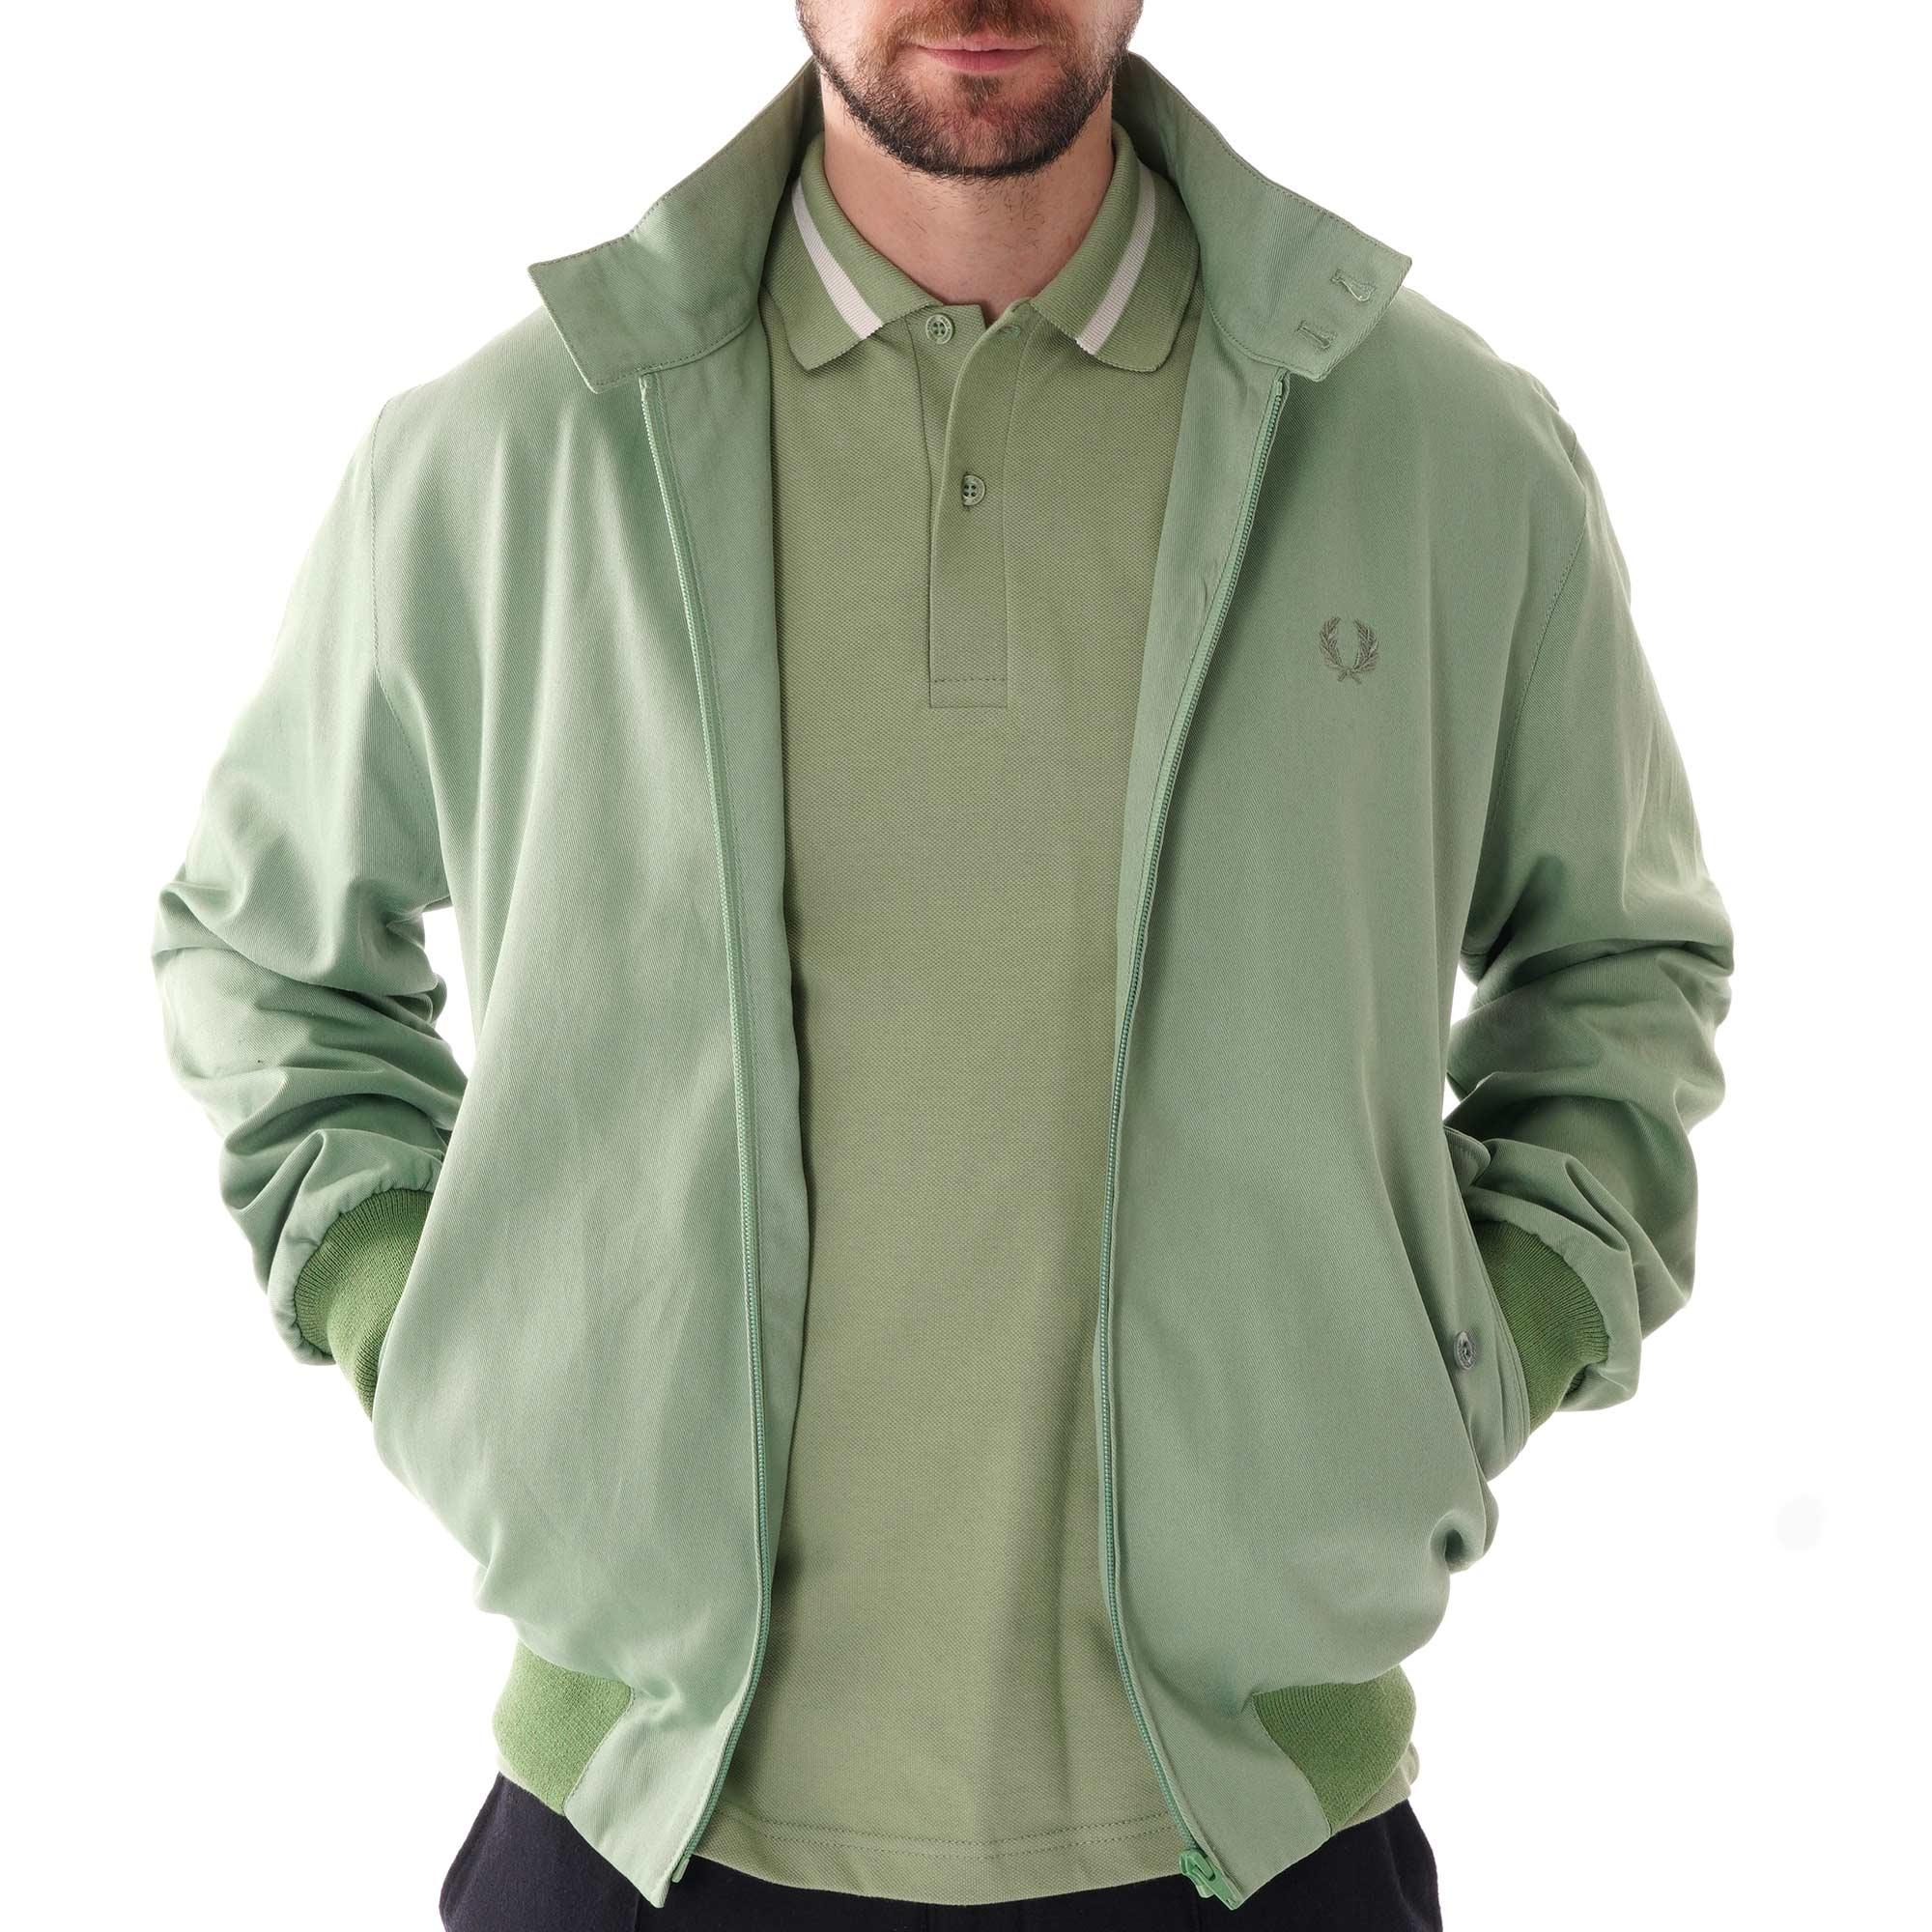 Fred Perry Cotton Harrington Jacket in Pistachio (Green) for Men - Lyst